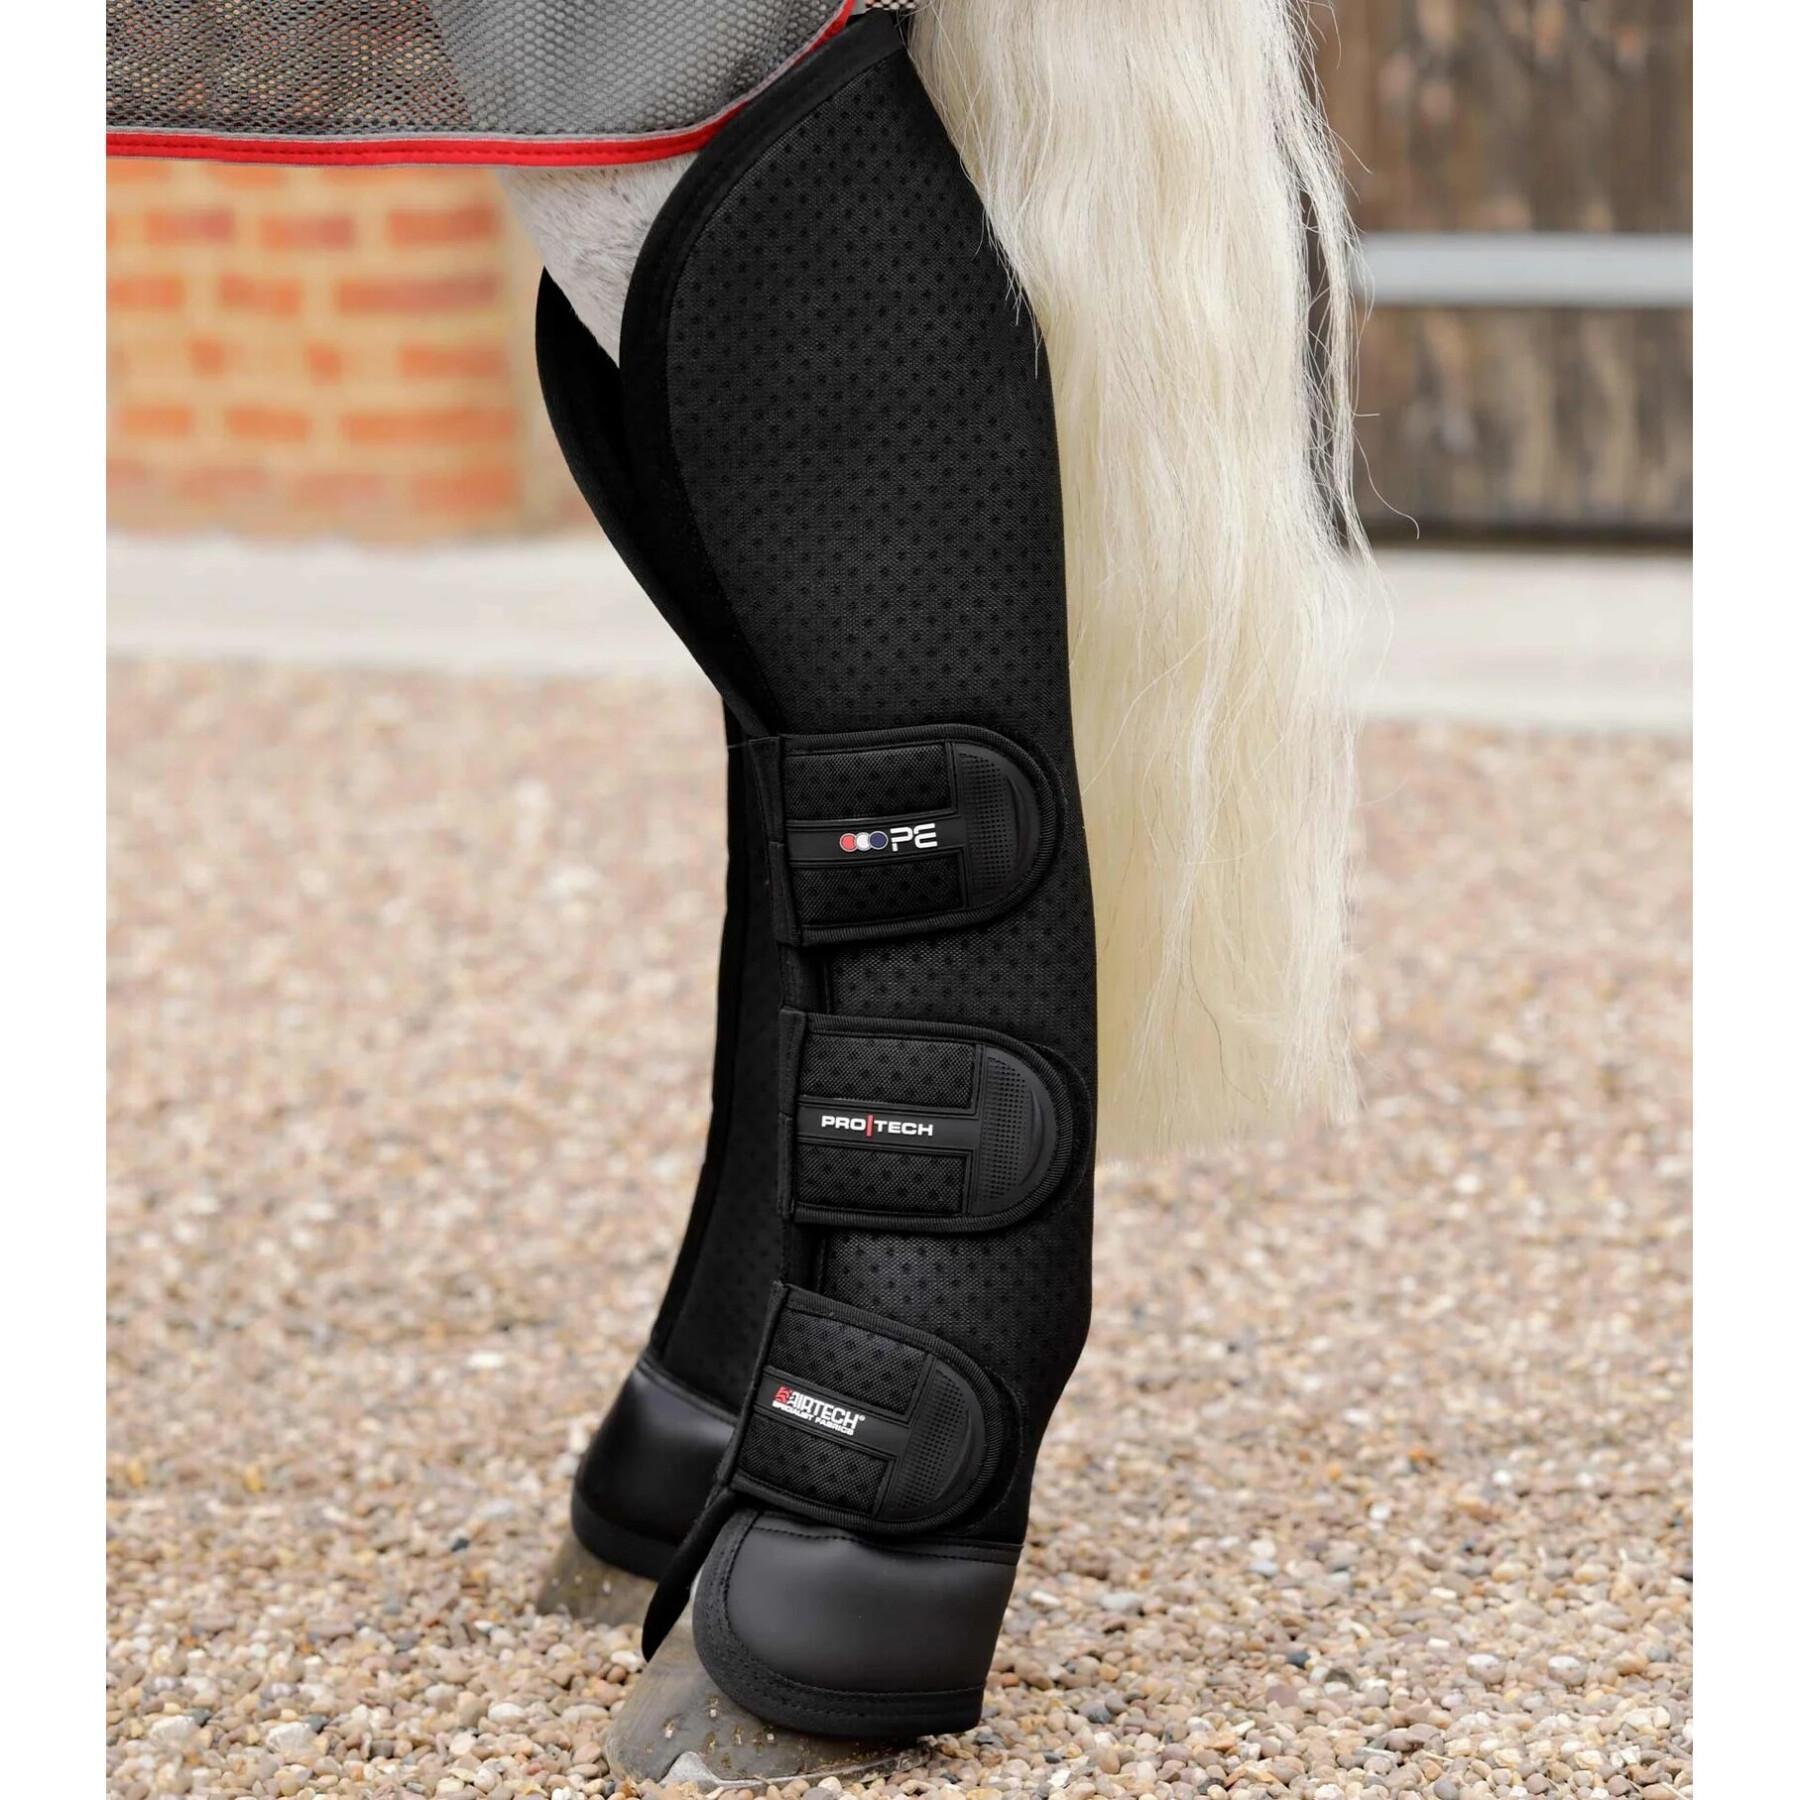 Transport gaiters for horses Premier Equine Airtechnology